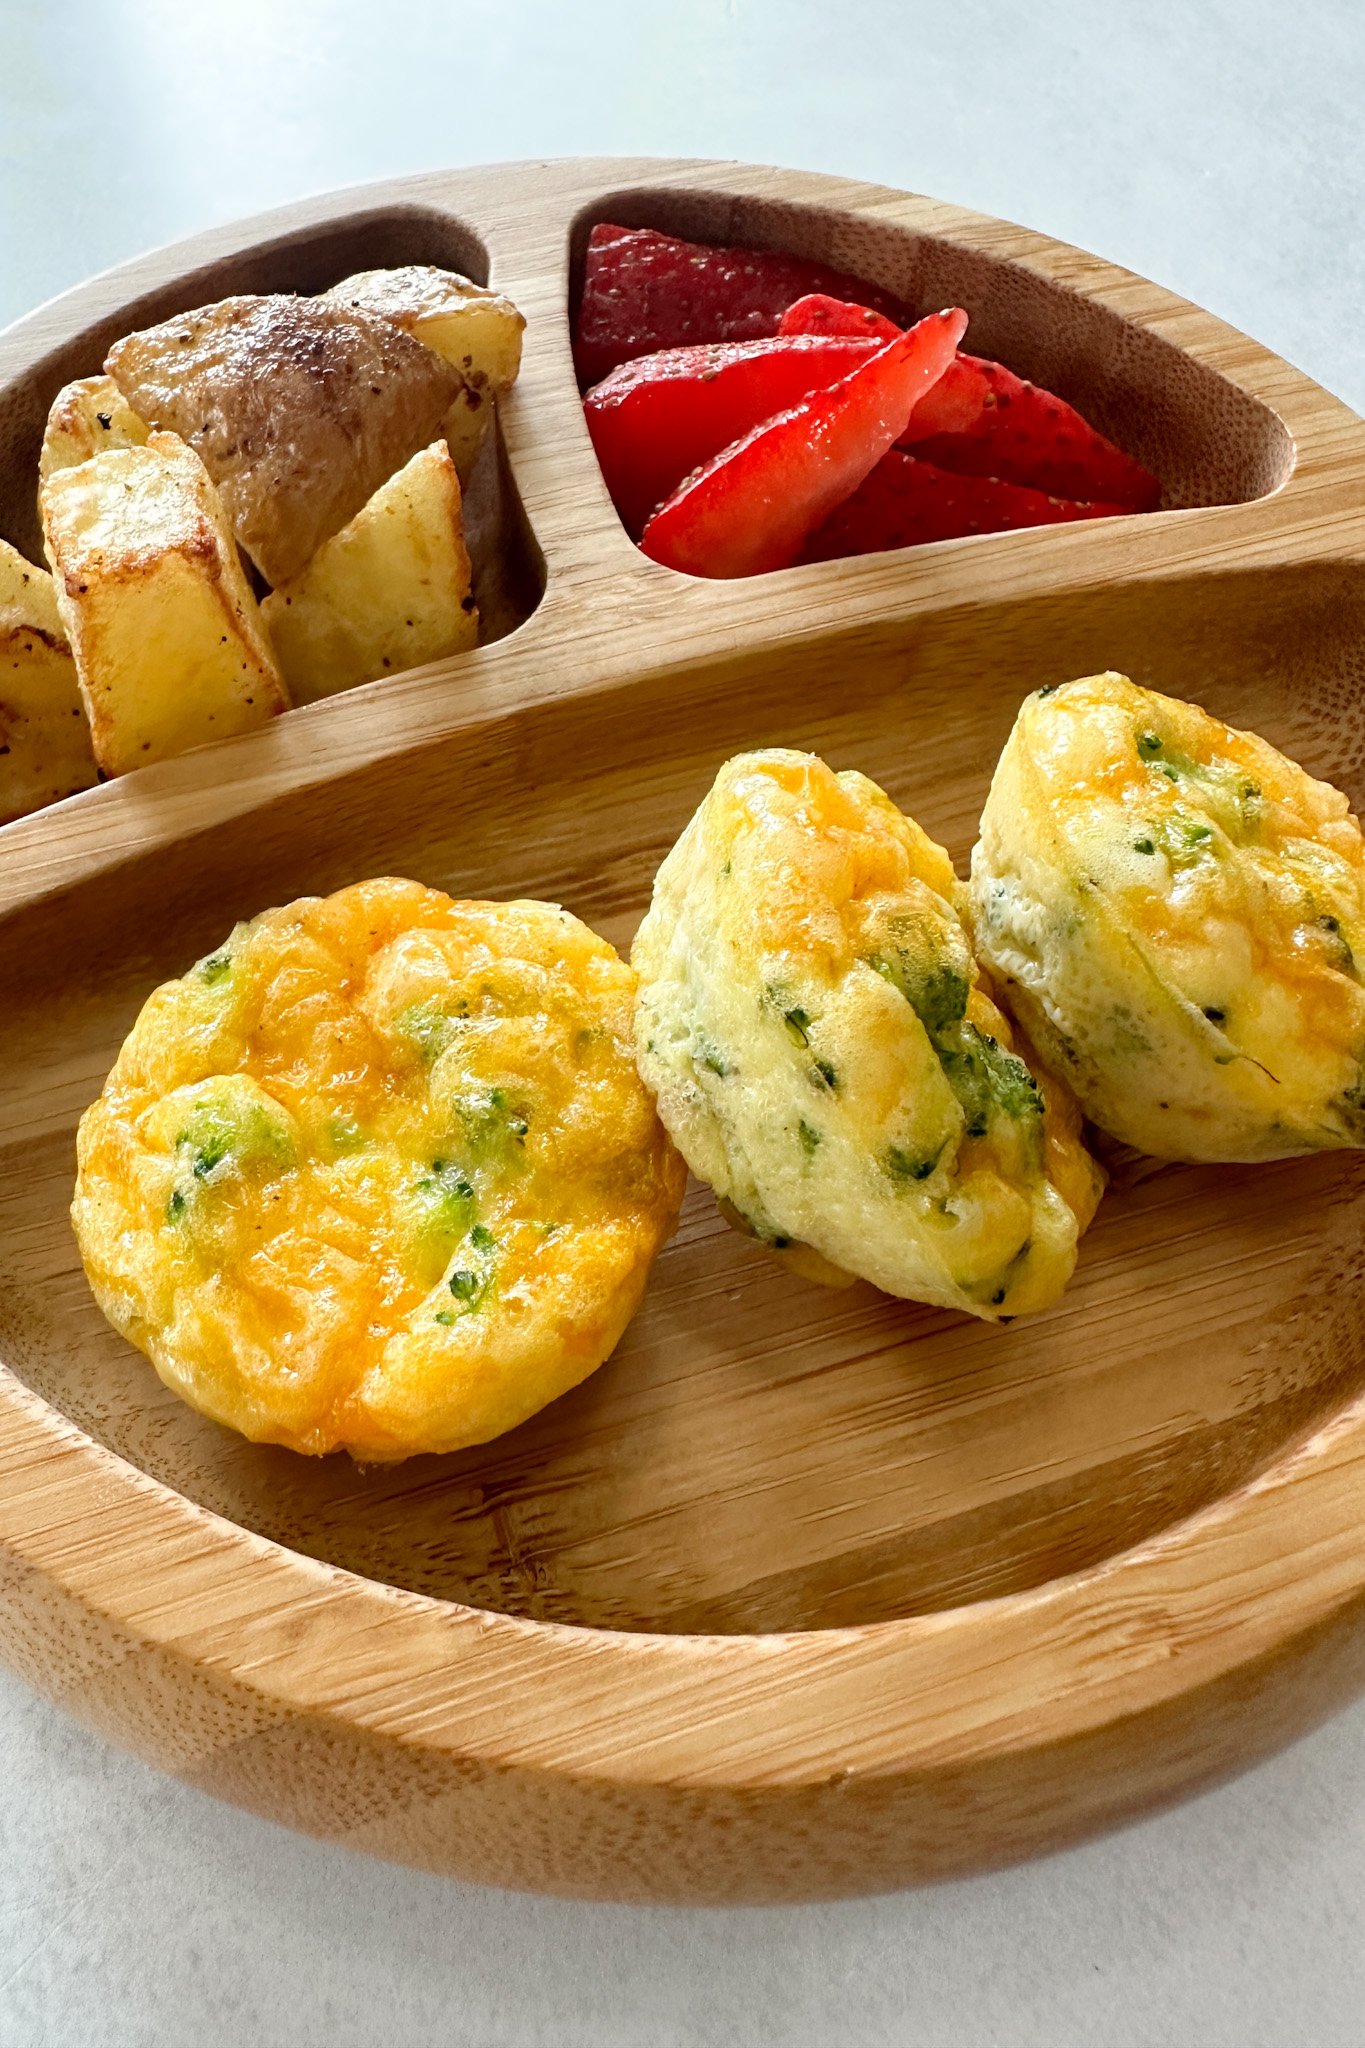 Broccoli egg bites served with fruits and potatoes.